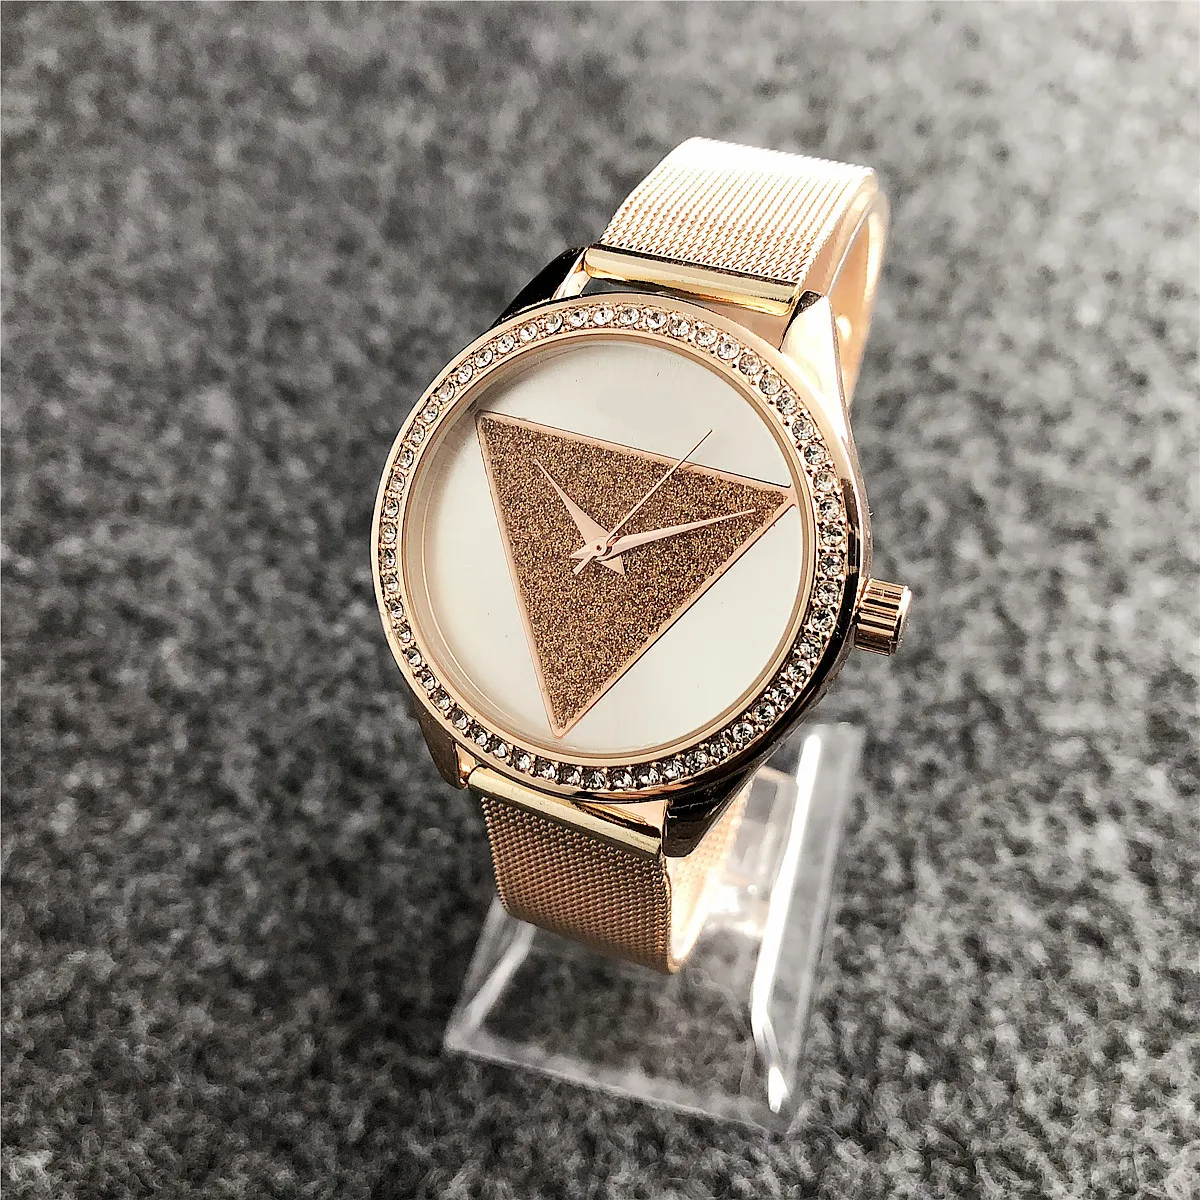 

fashion watch lady Brand 2021 new luxury classic designer stainless steel band gold watches for women diamond reloj hombre, Picture shows